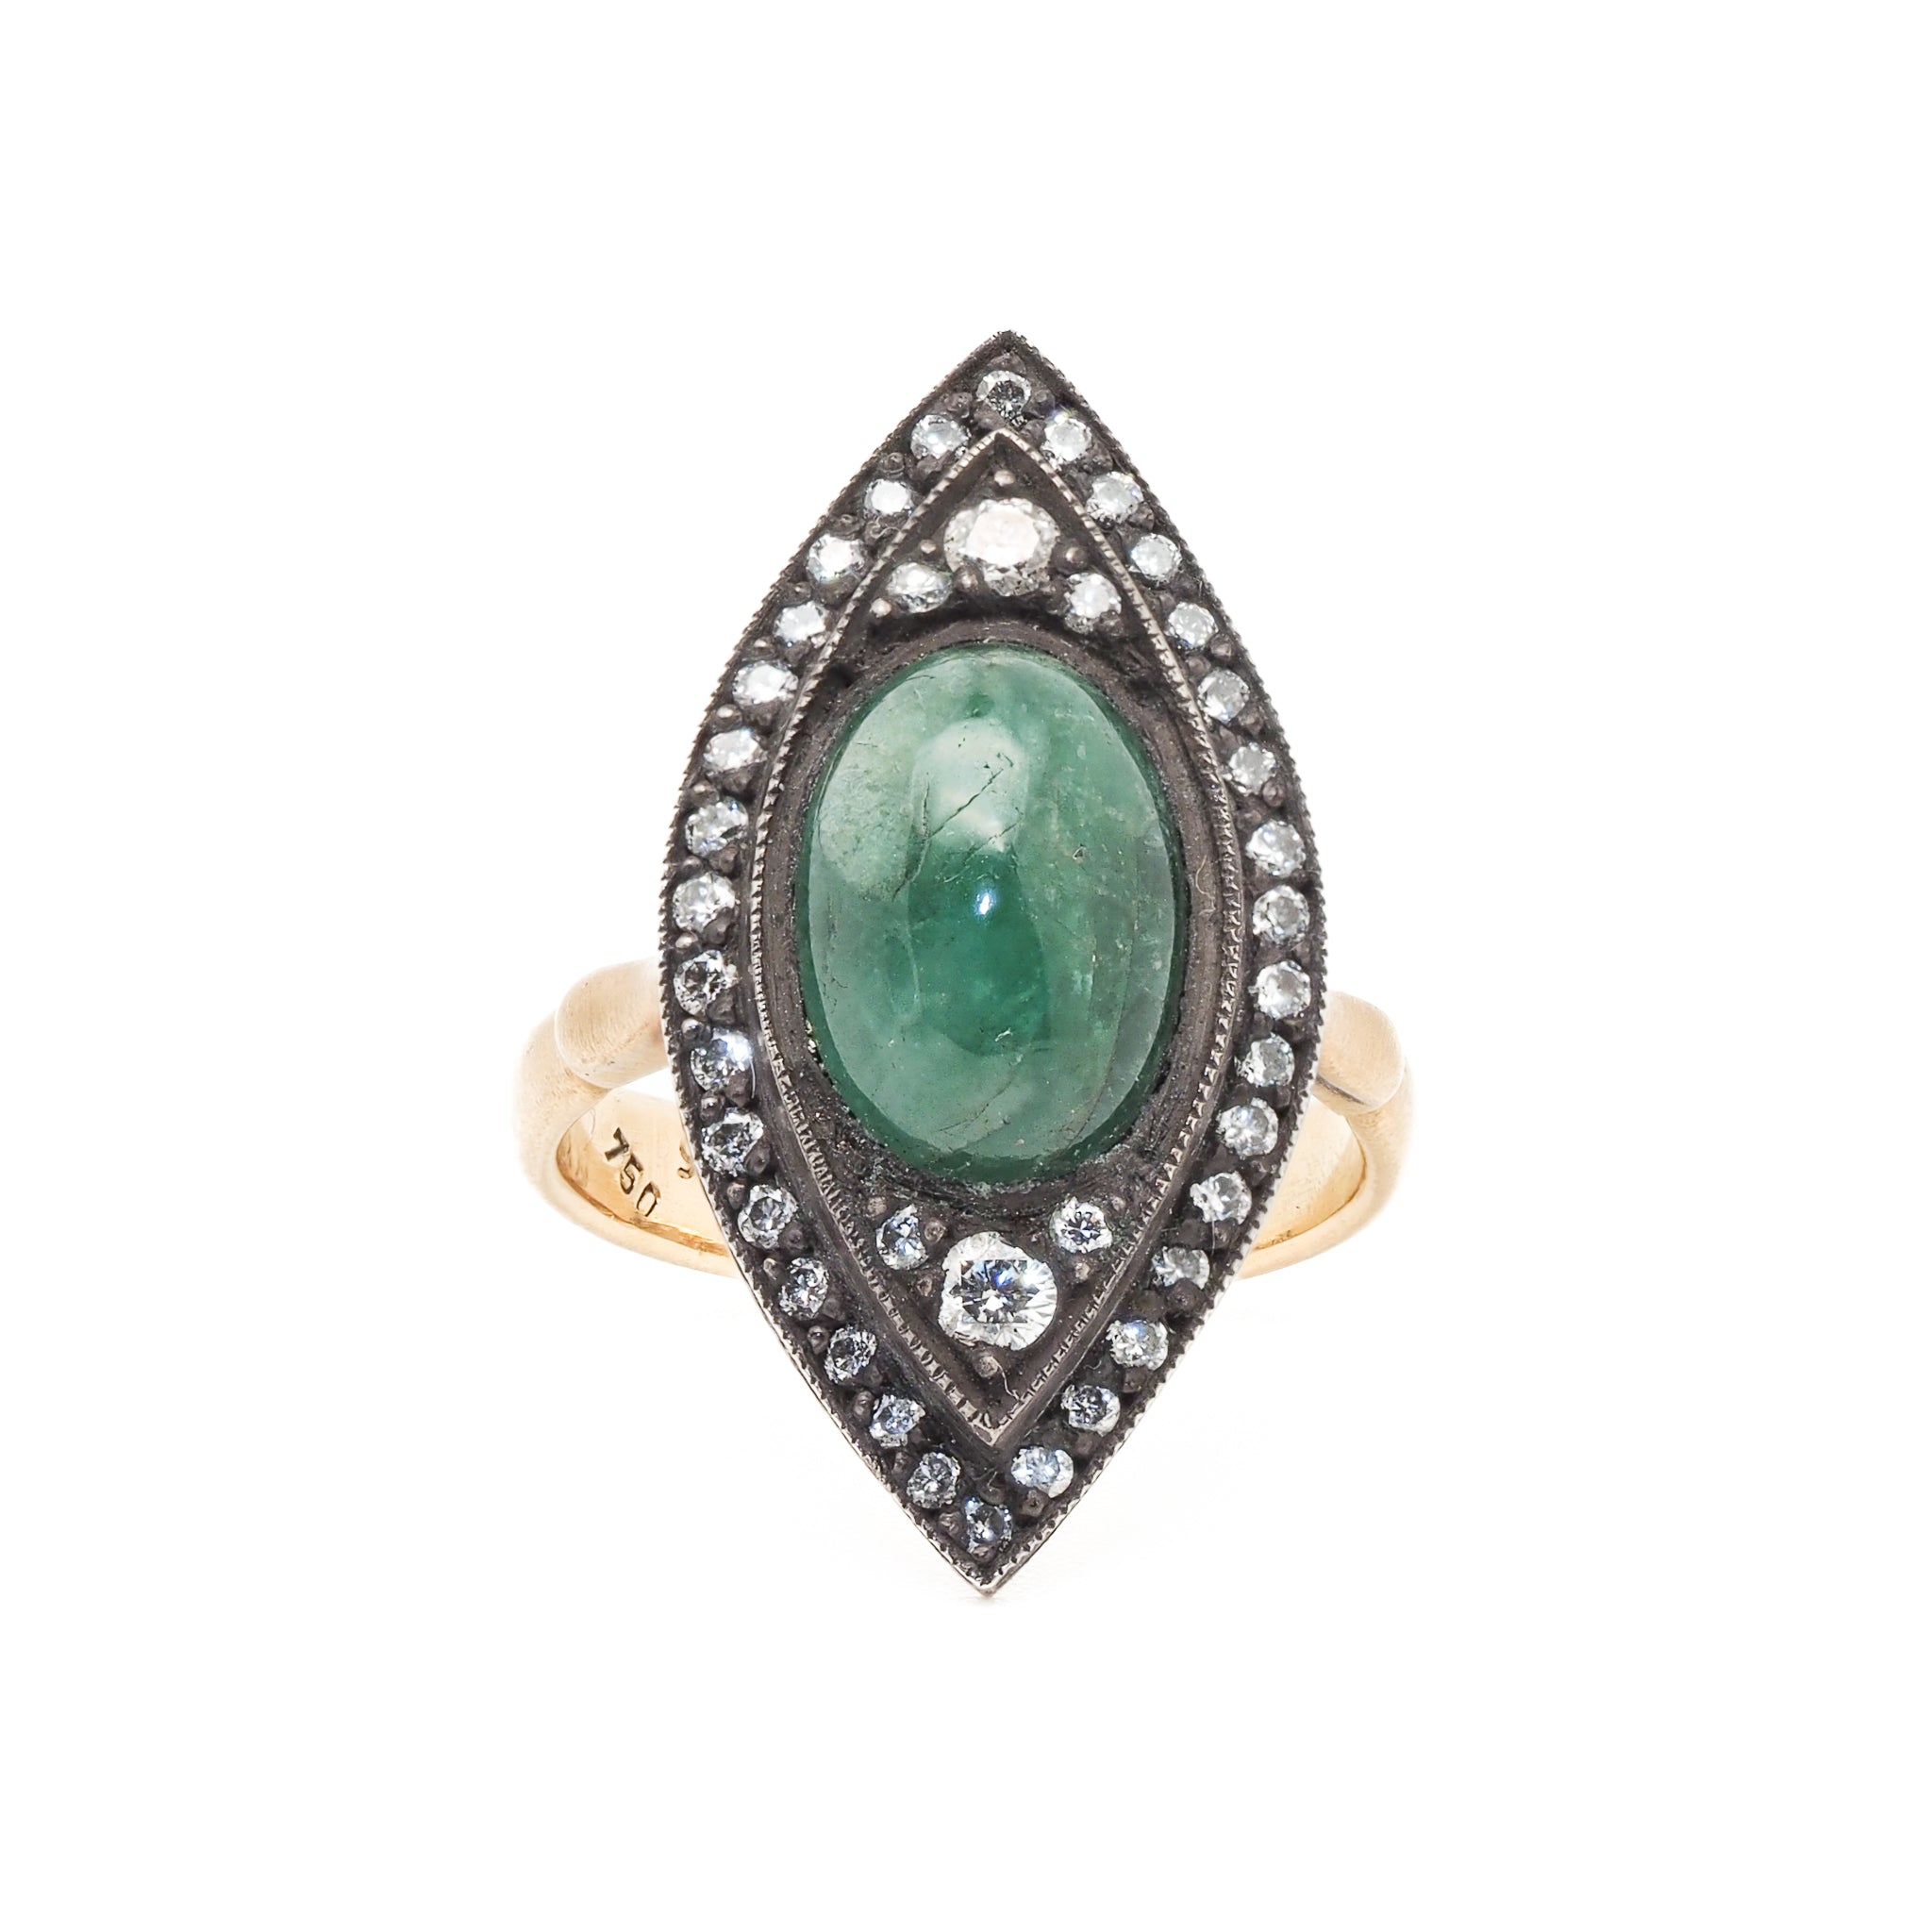 The Emerald & Diamond Eye Ring featuring a stunning 3.50ct natural emerald surrounded by sparkling diamonds, set in 18k yellow gold.